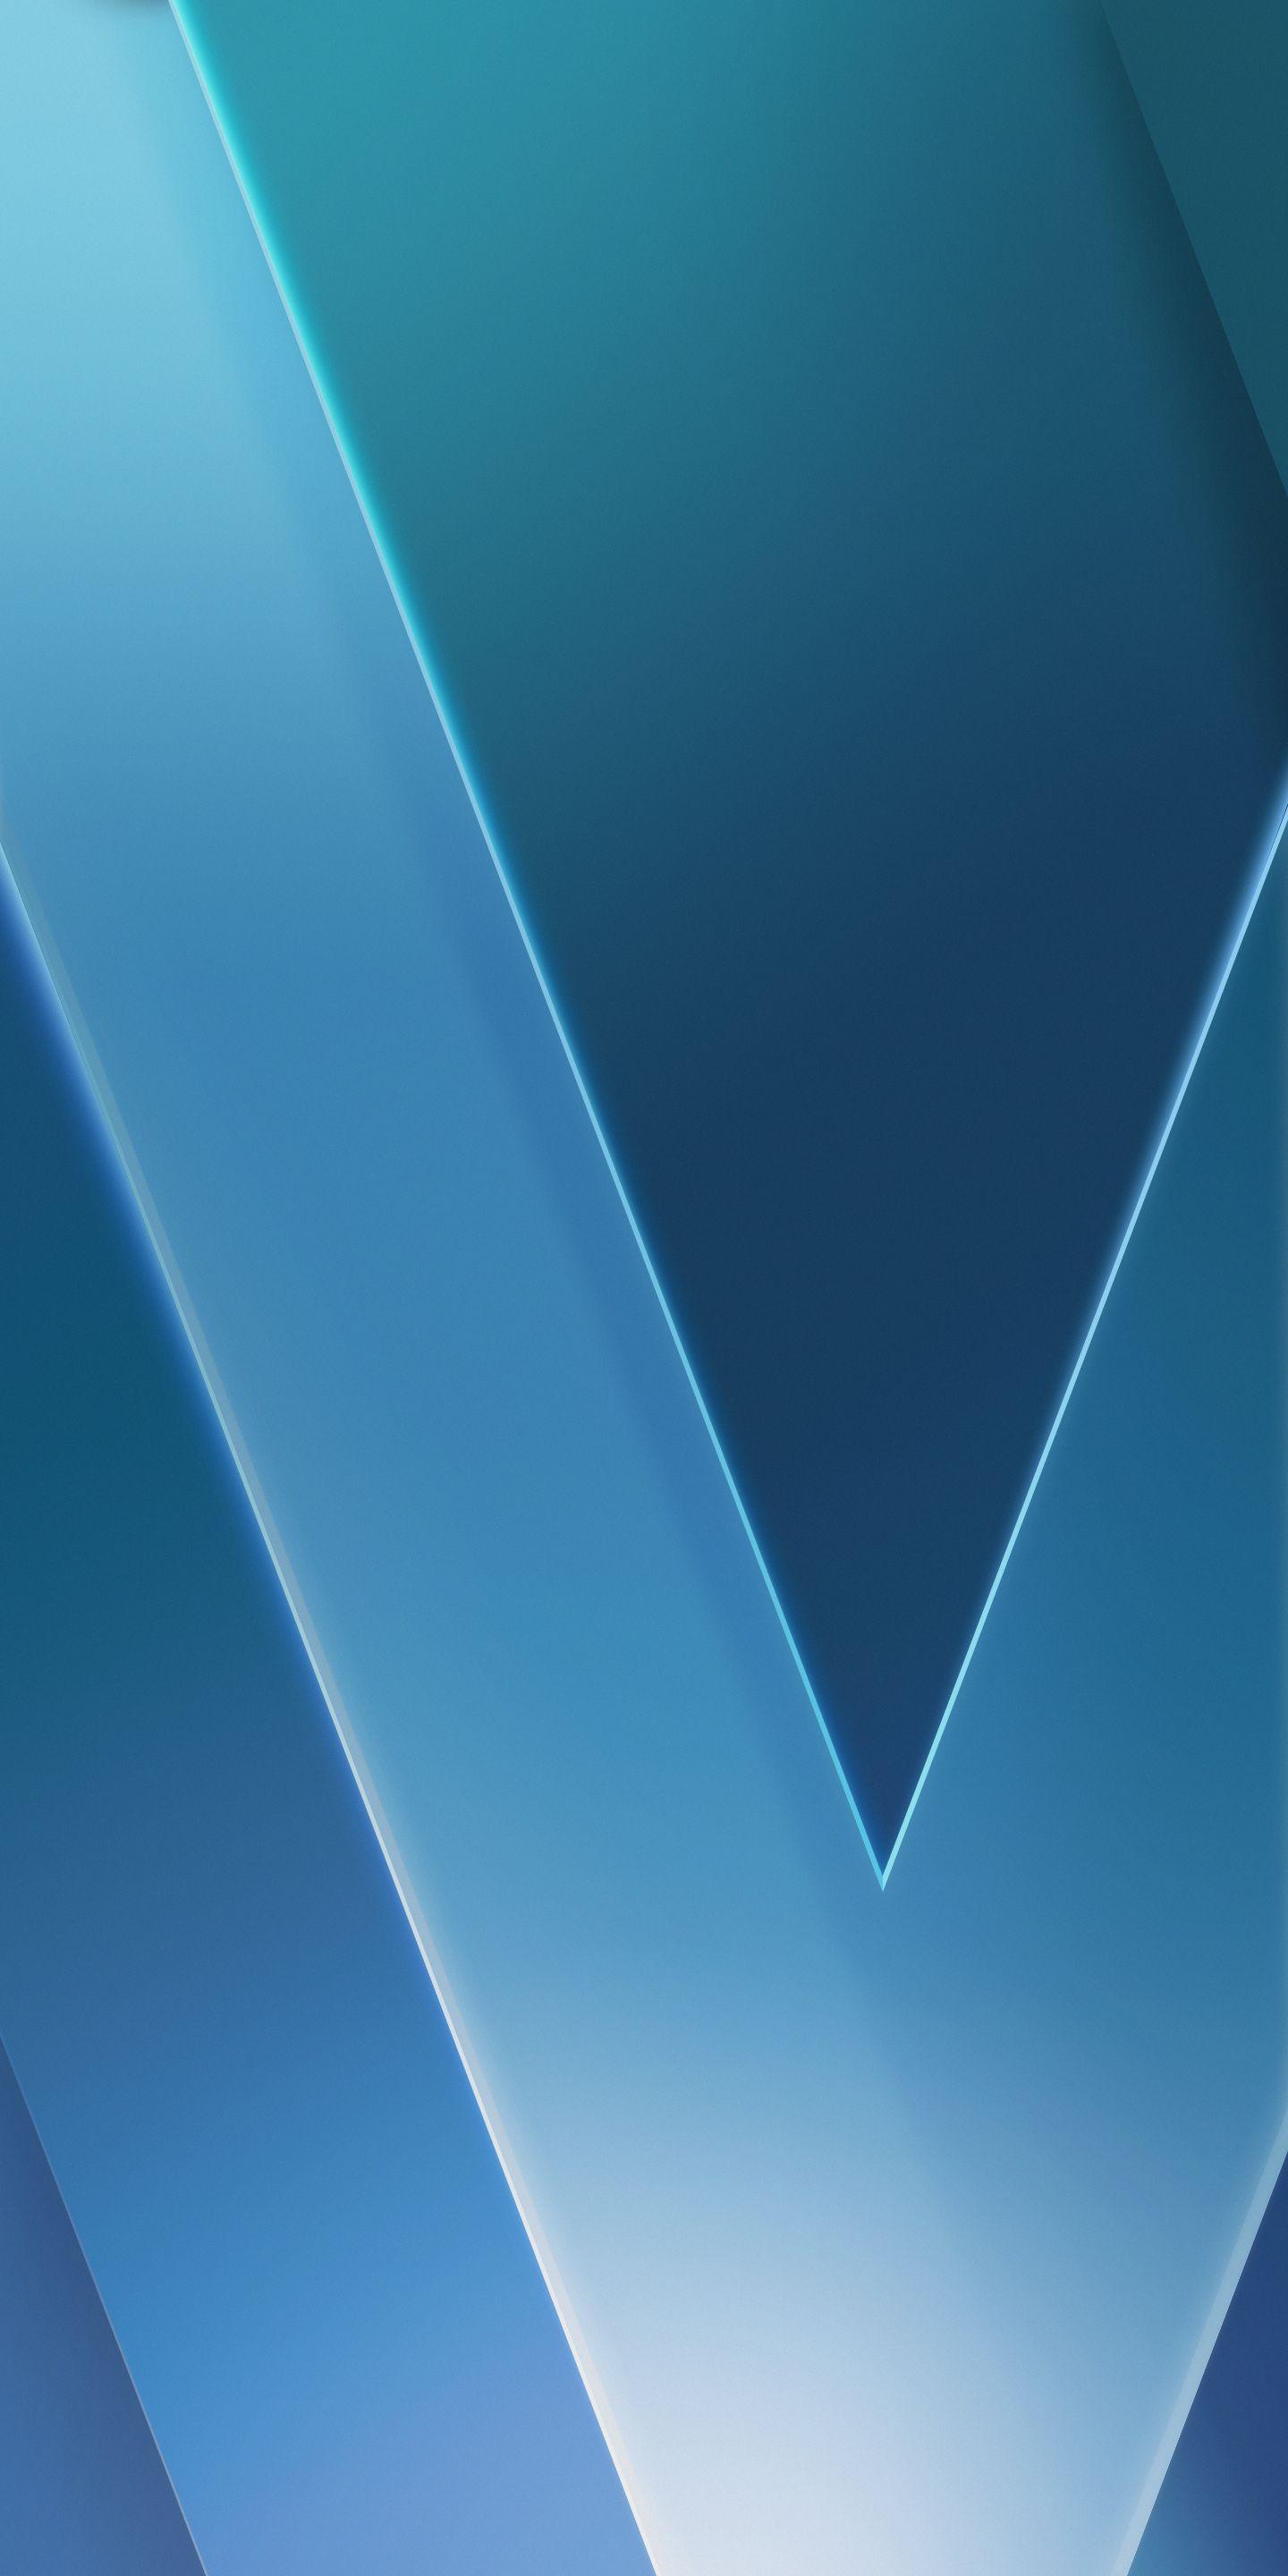 LG V30 wallpaper: download all of them right here